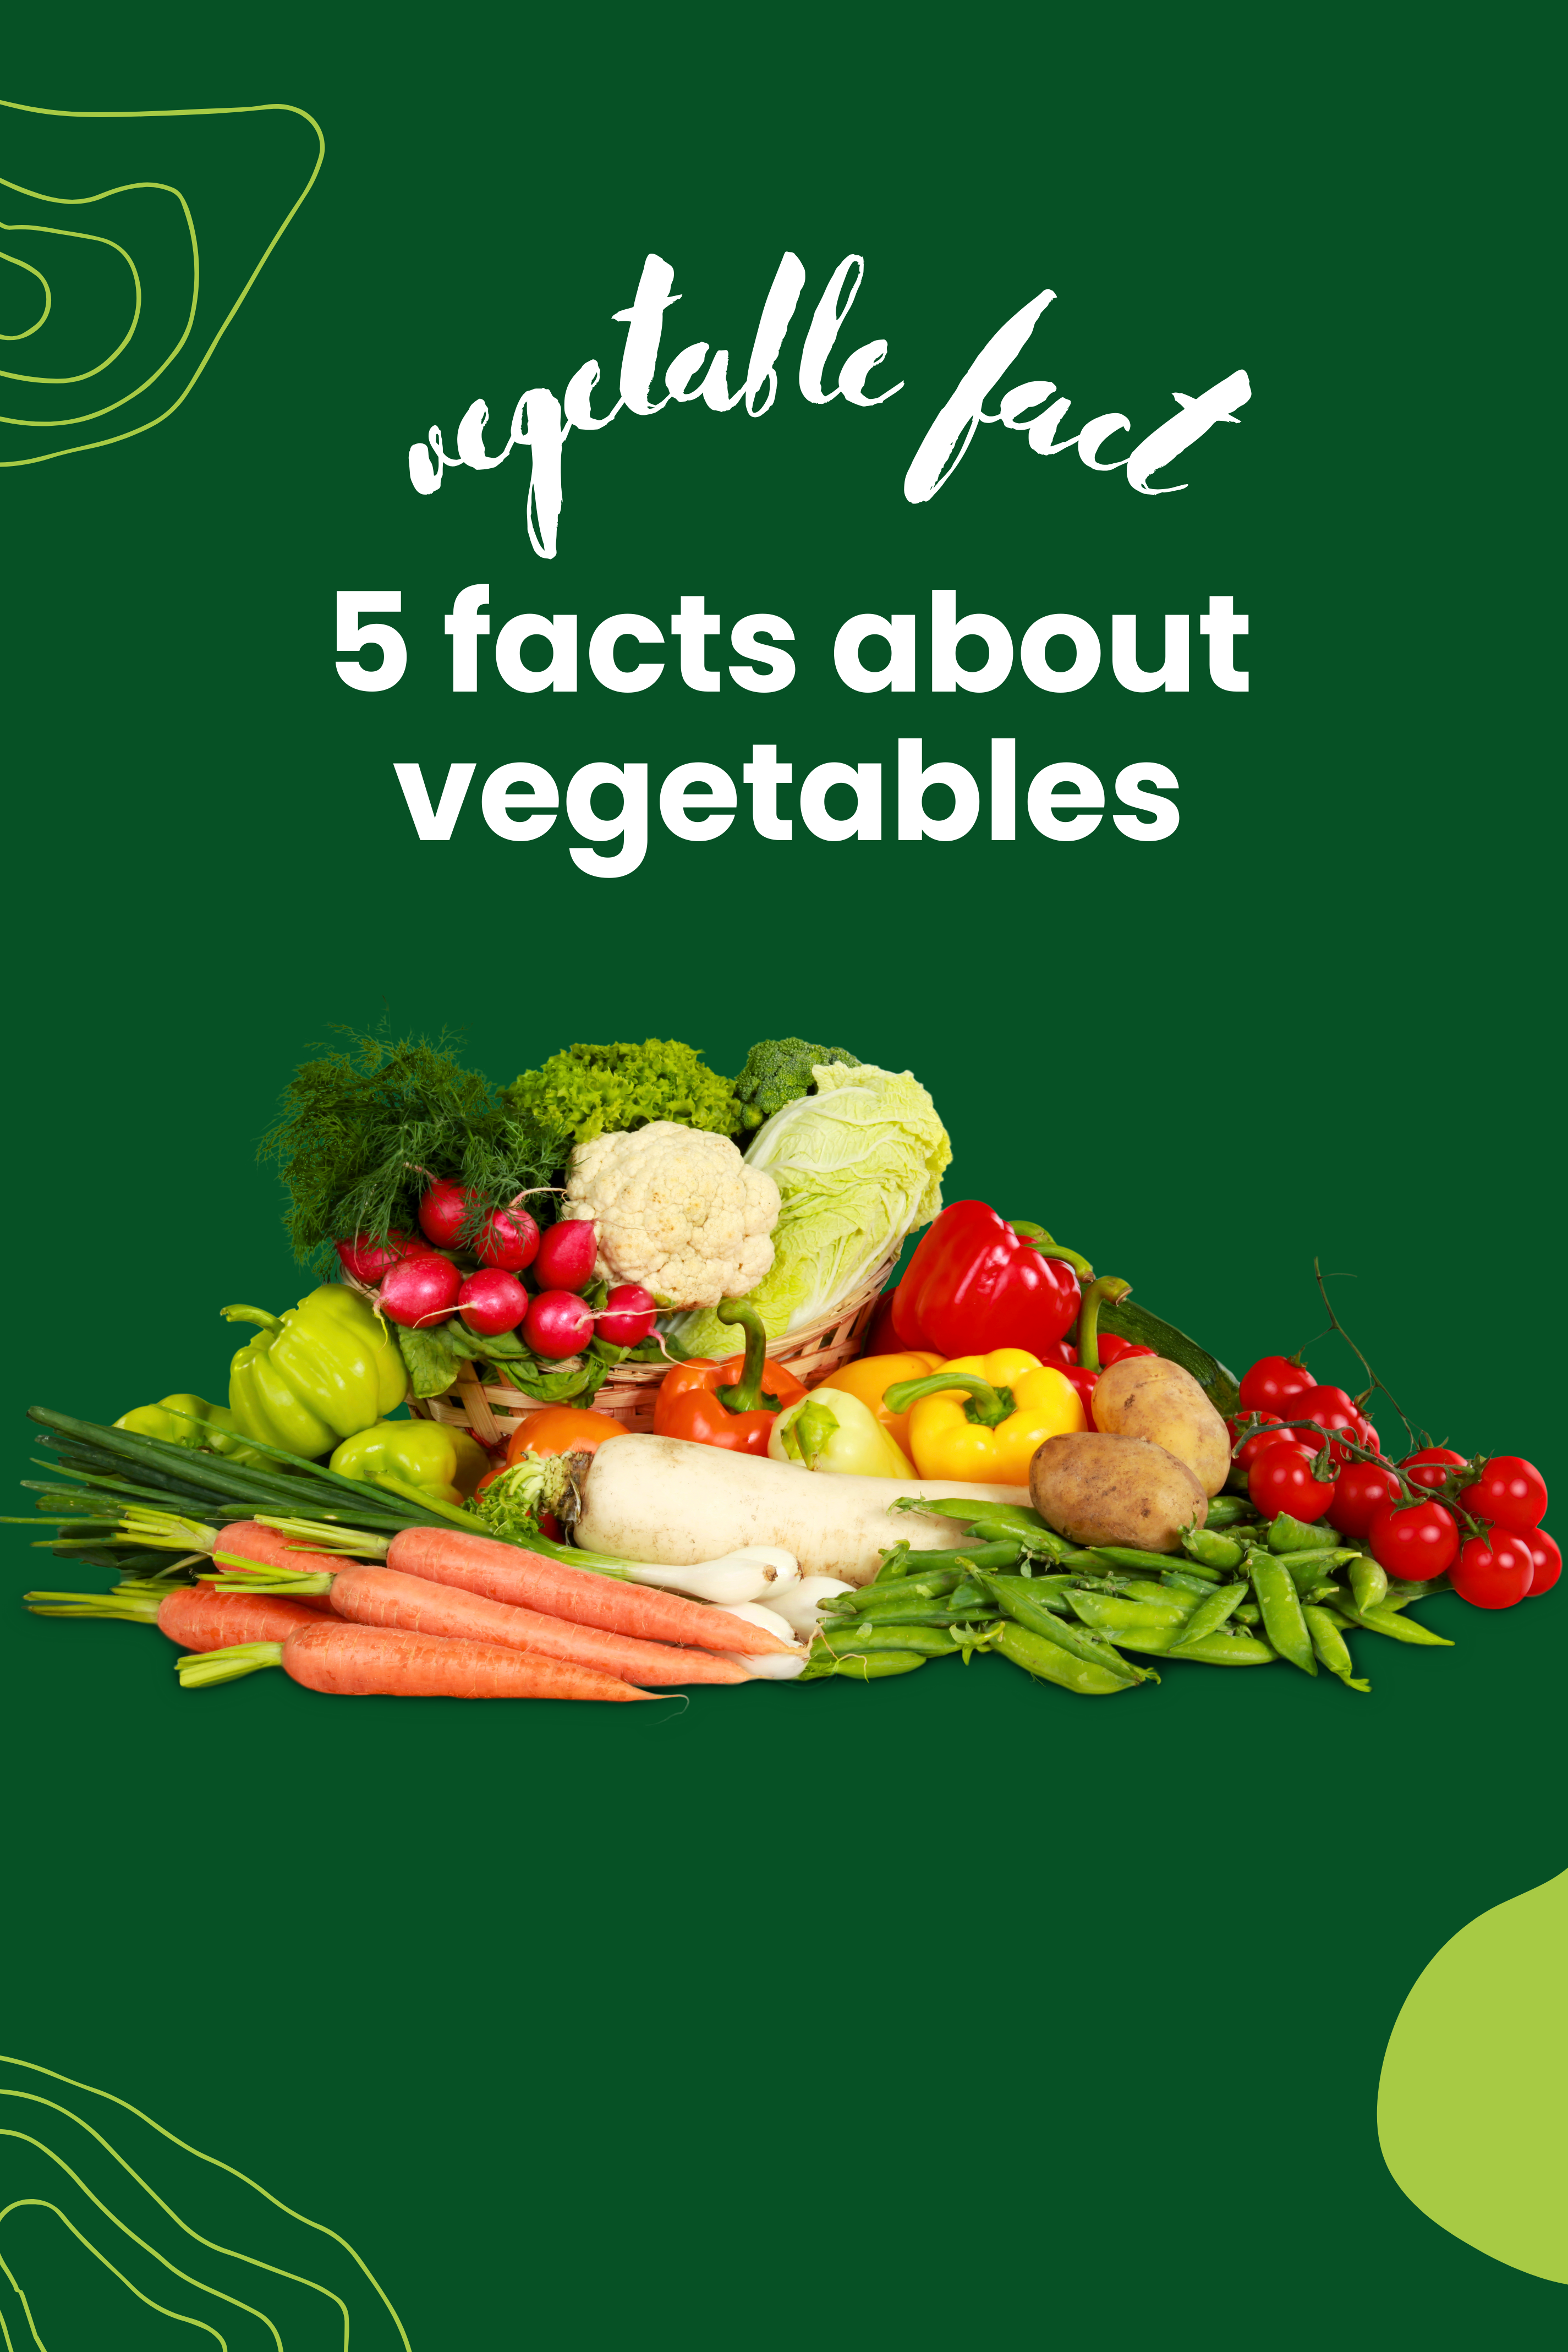 5 facts about vegetables